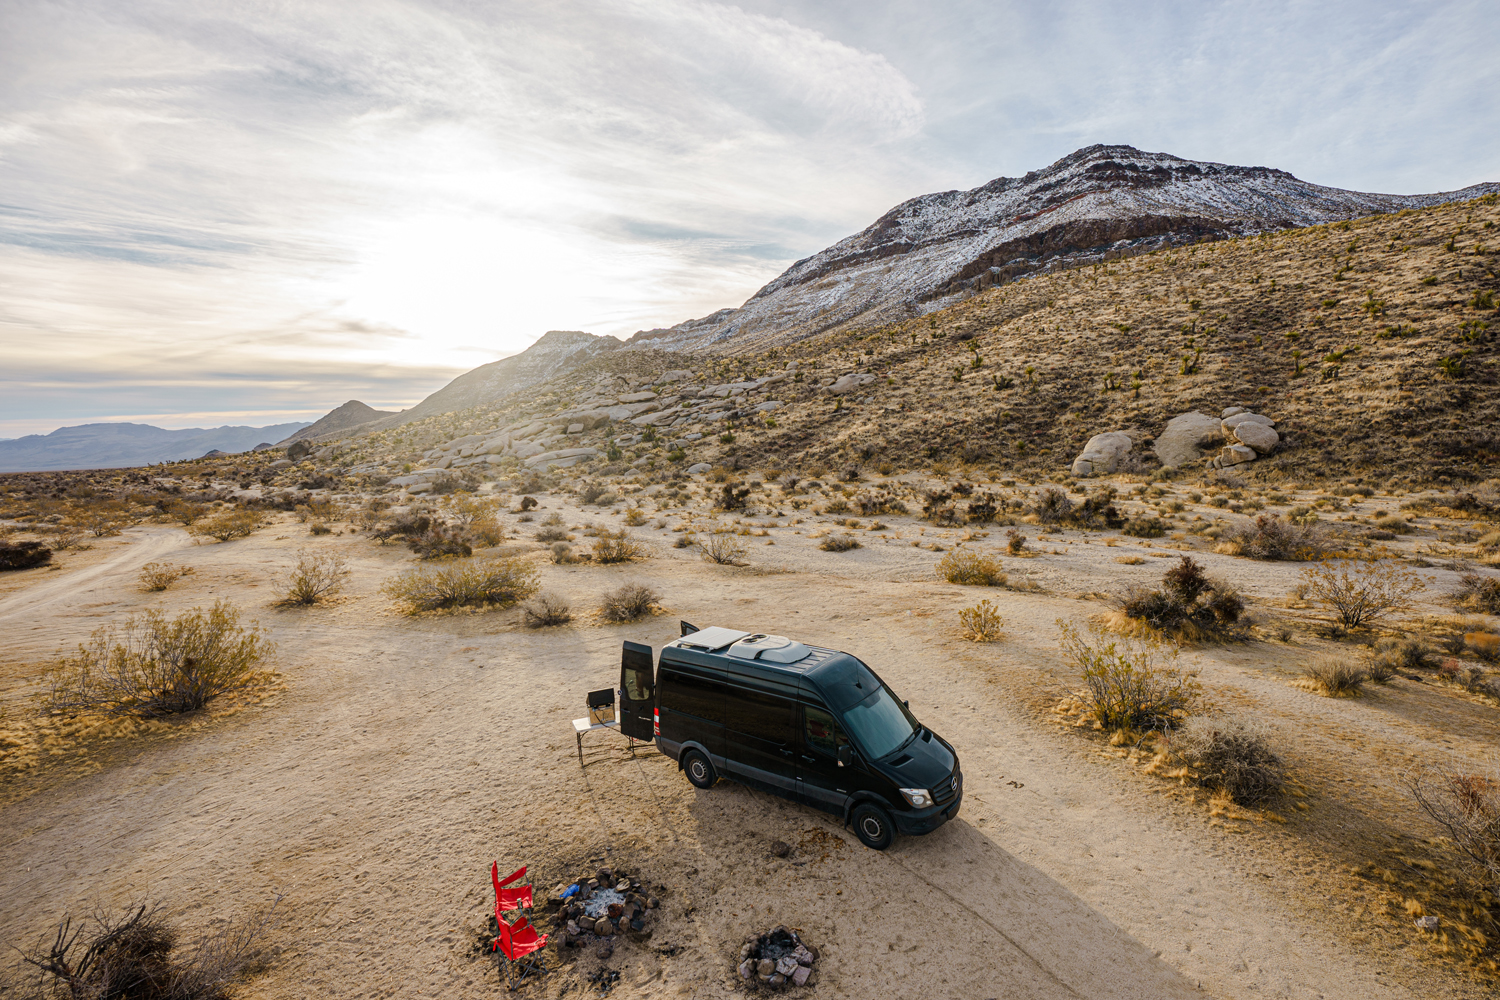 A bird's eye view of the converted Sprinter campervan parked in the Mojave National Preserve.